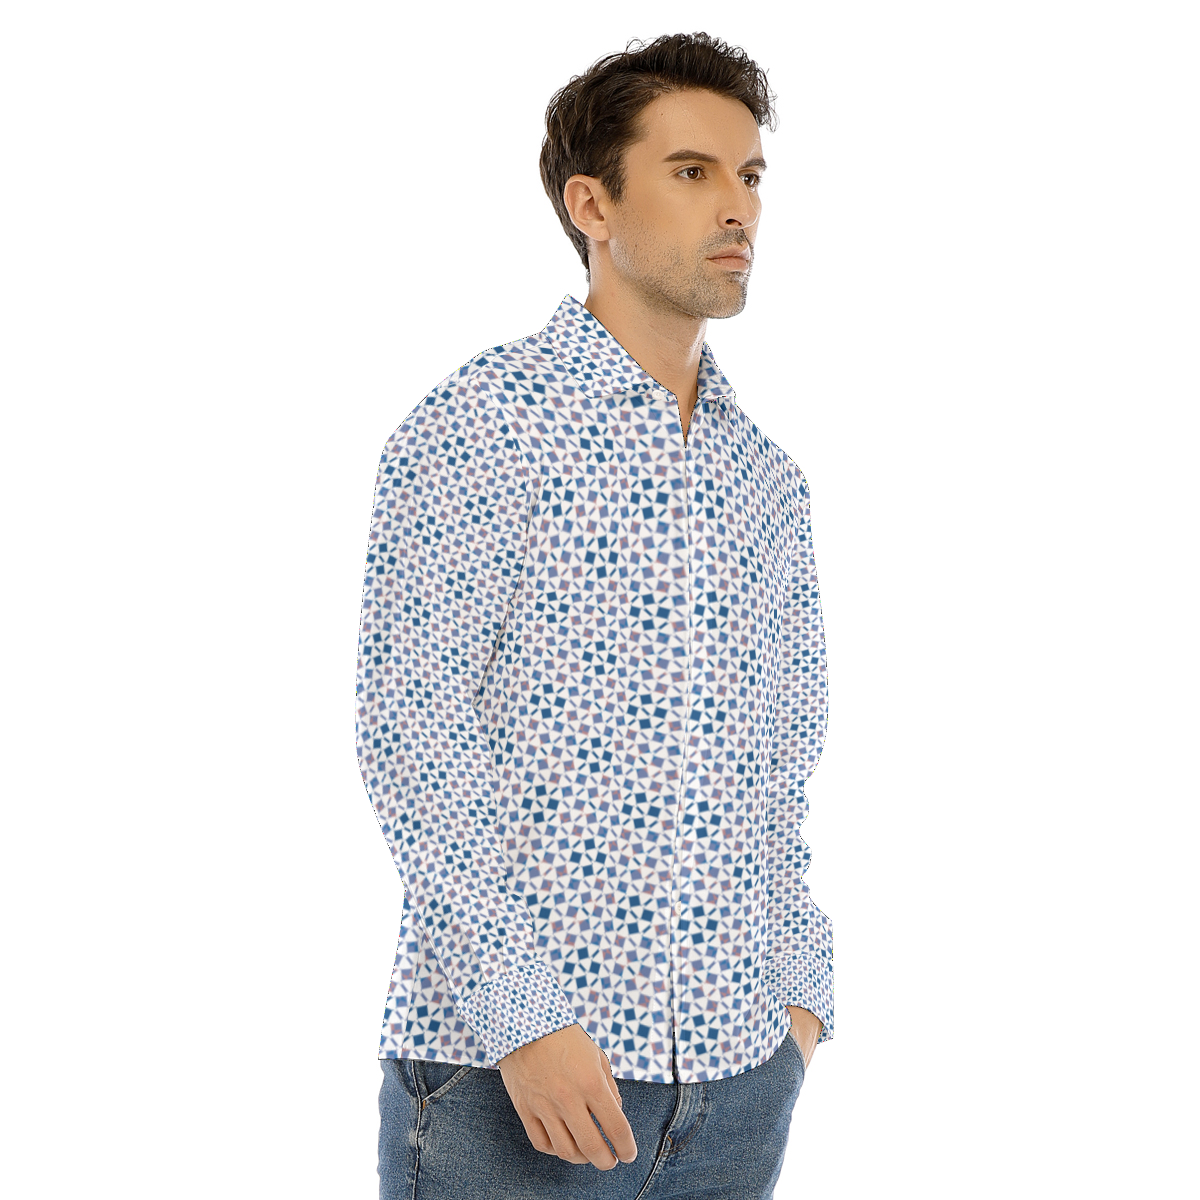 Budapest Men's Buttonup Shirt With Concealed Placket